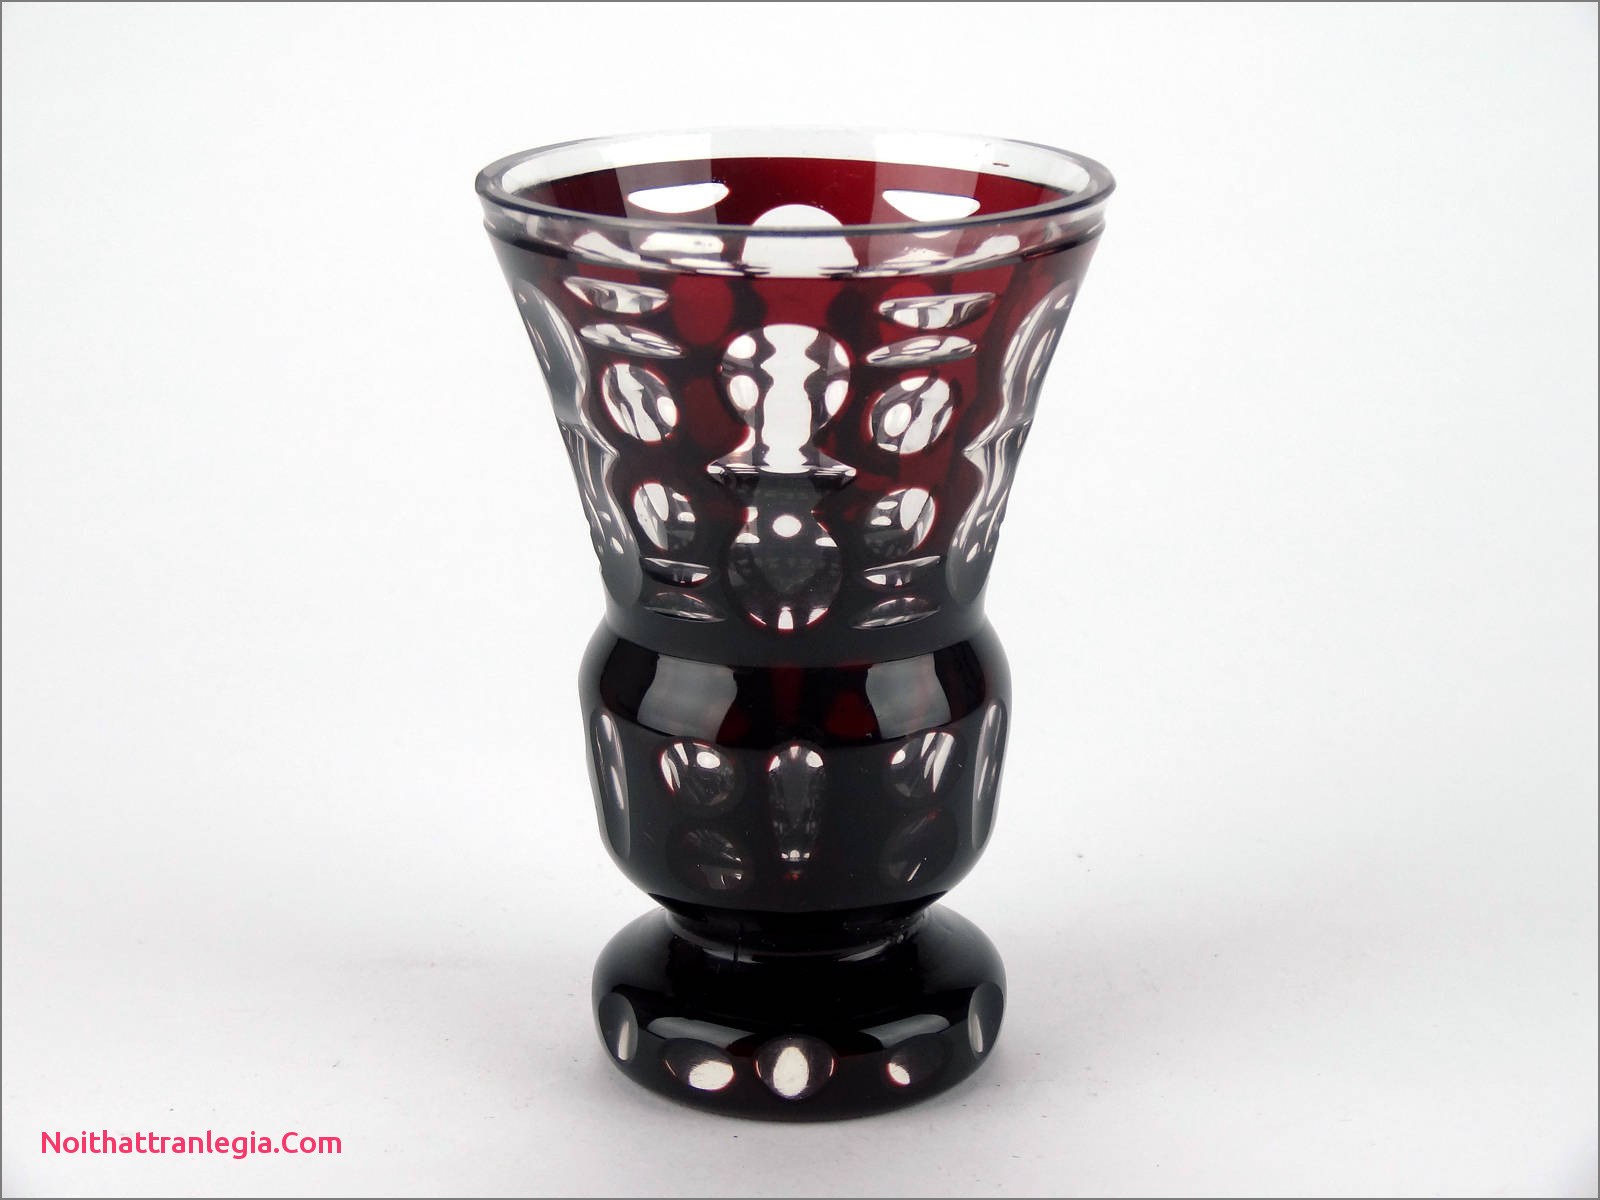 18 attractive Small Antique Glass Vases 2023 free download small antique glass vases of 20 cut glass antique vase noithattranlegia vases design inside antique c1910 bohemian cut to clear red glass vase czech ruby red cut glass goblet